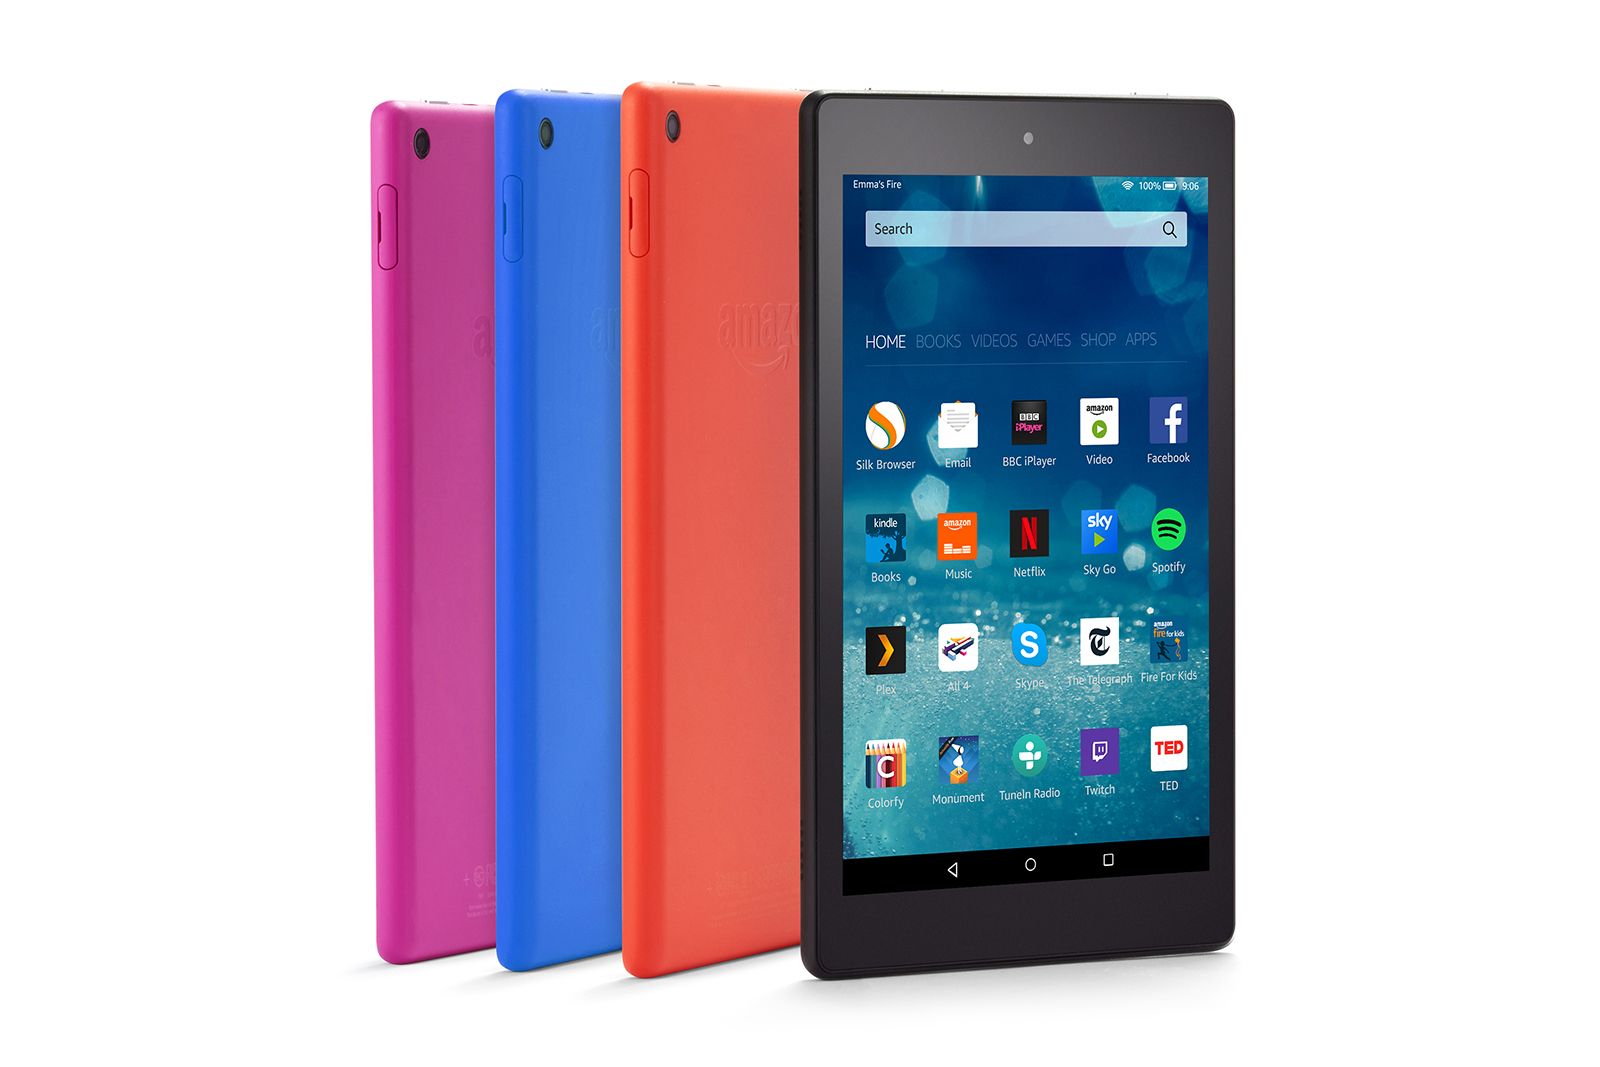  90 amazon fire hd 8 tablet gets supercharged to the max image 1